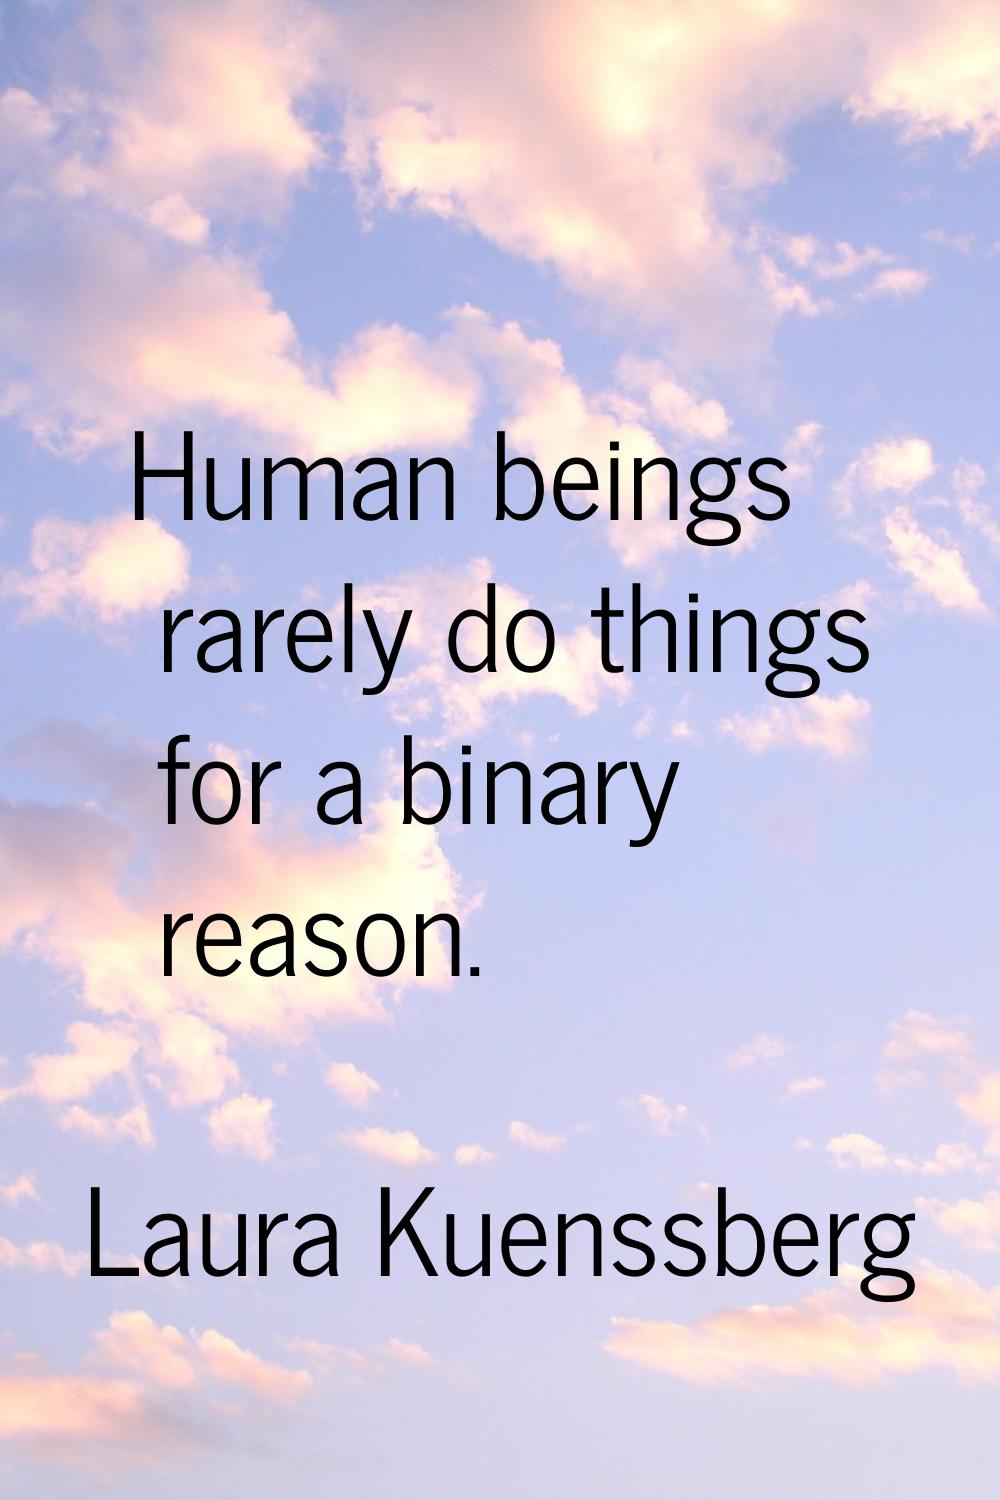 Human beings rarely do things for a binary reason.